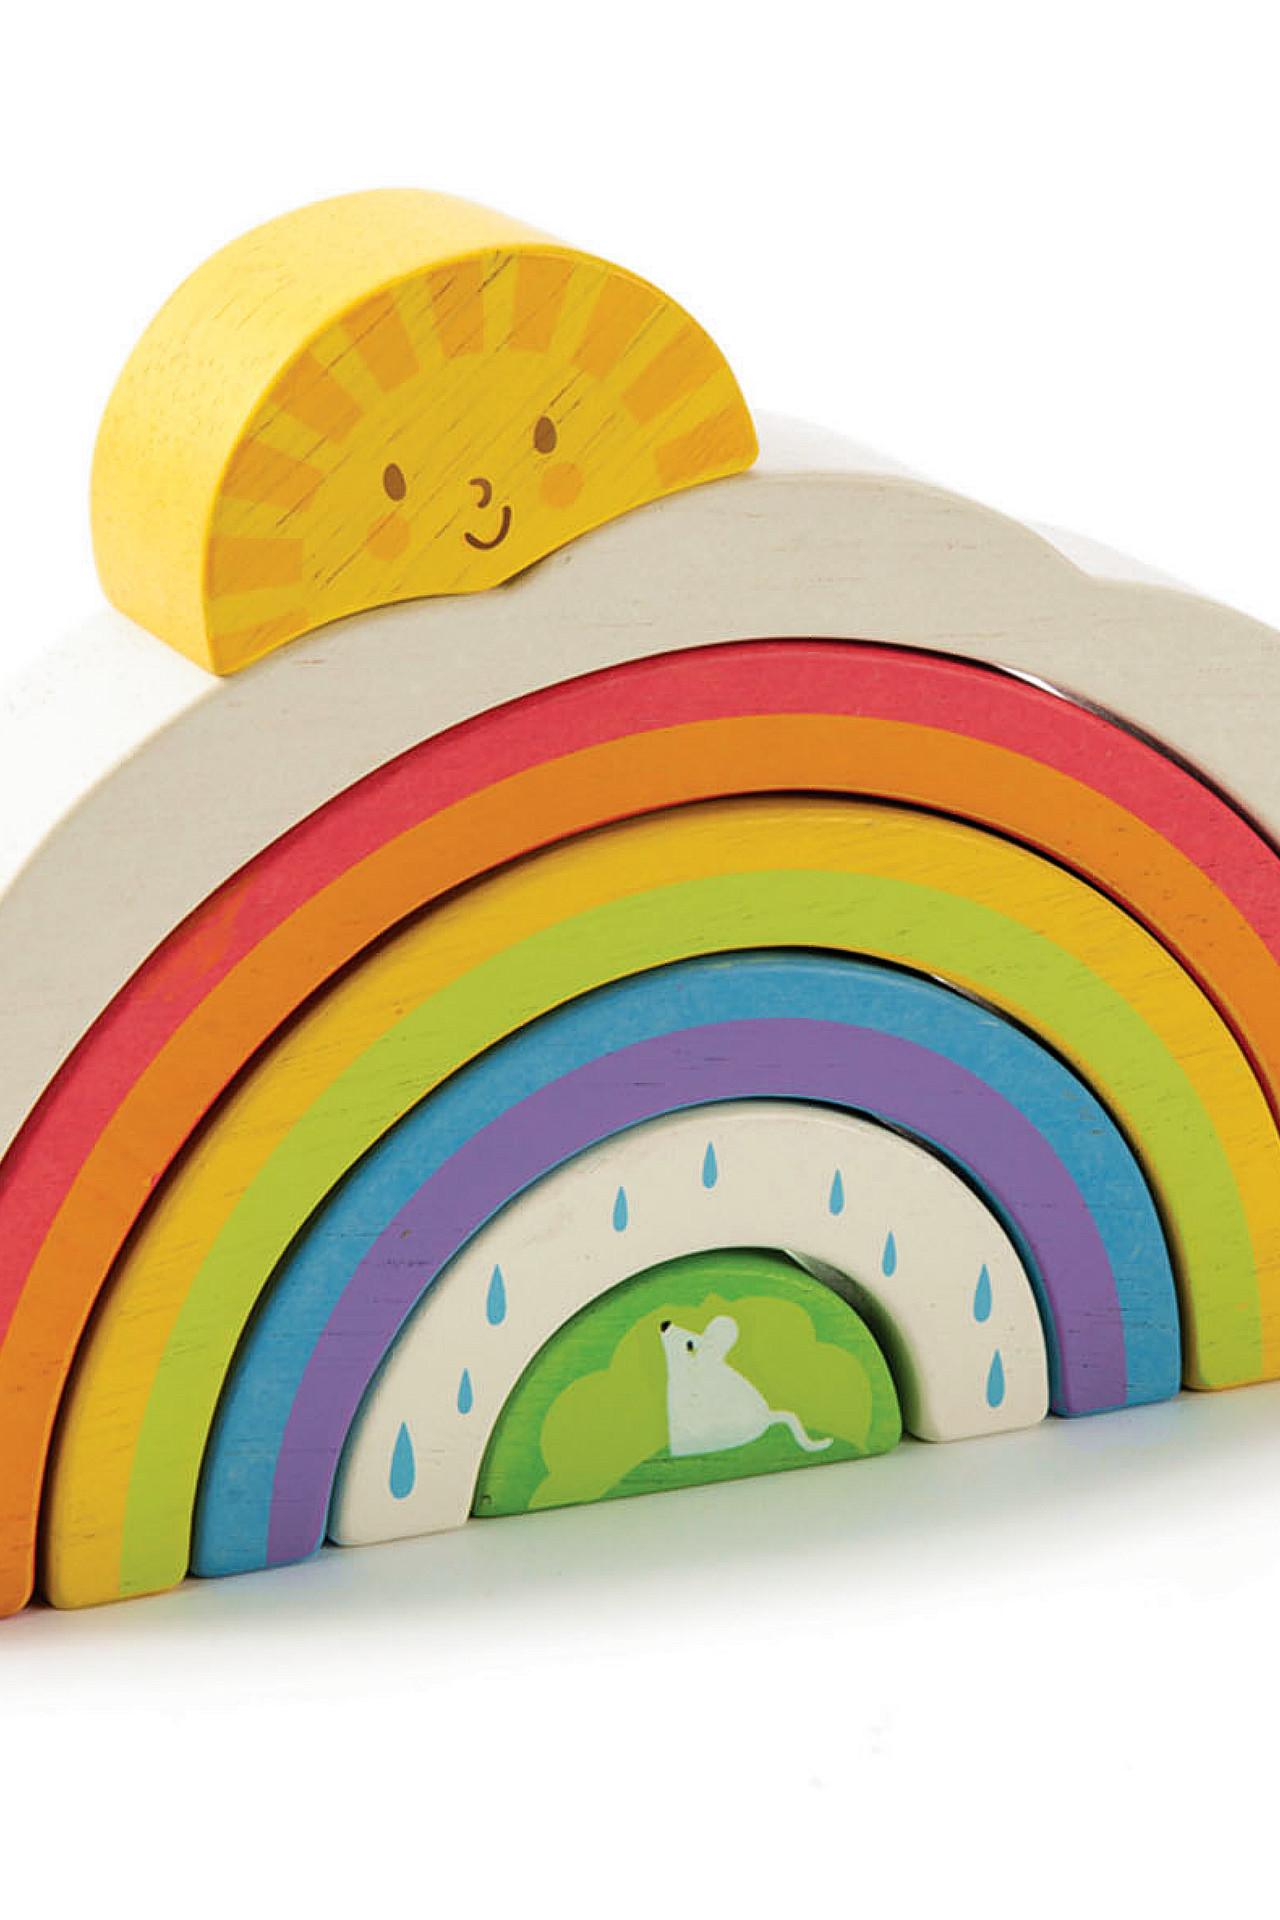 New Wooden 7 Piece Toy Rainbow with Stackable Pieces